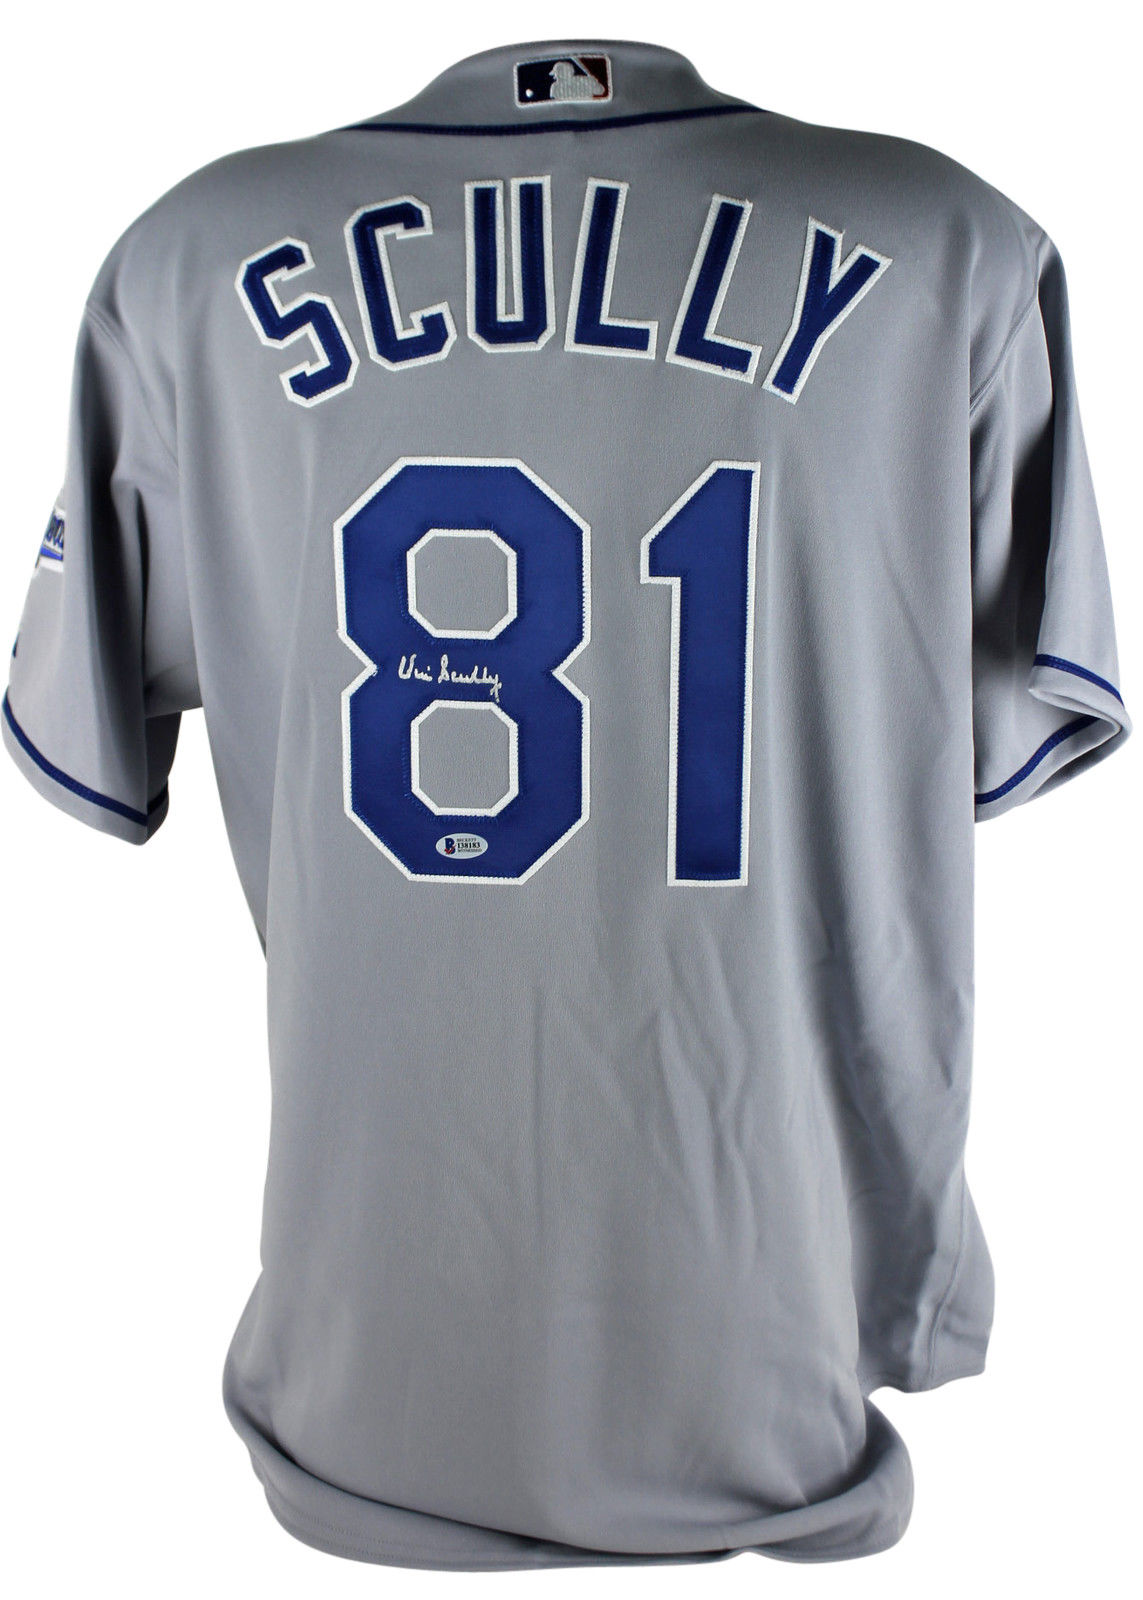 Vin Scully Autographed Los Angeles Dodgers Majestic White XL Jersey BAS  26017